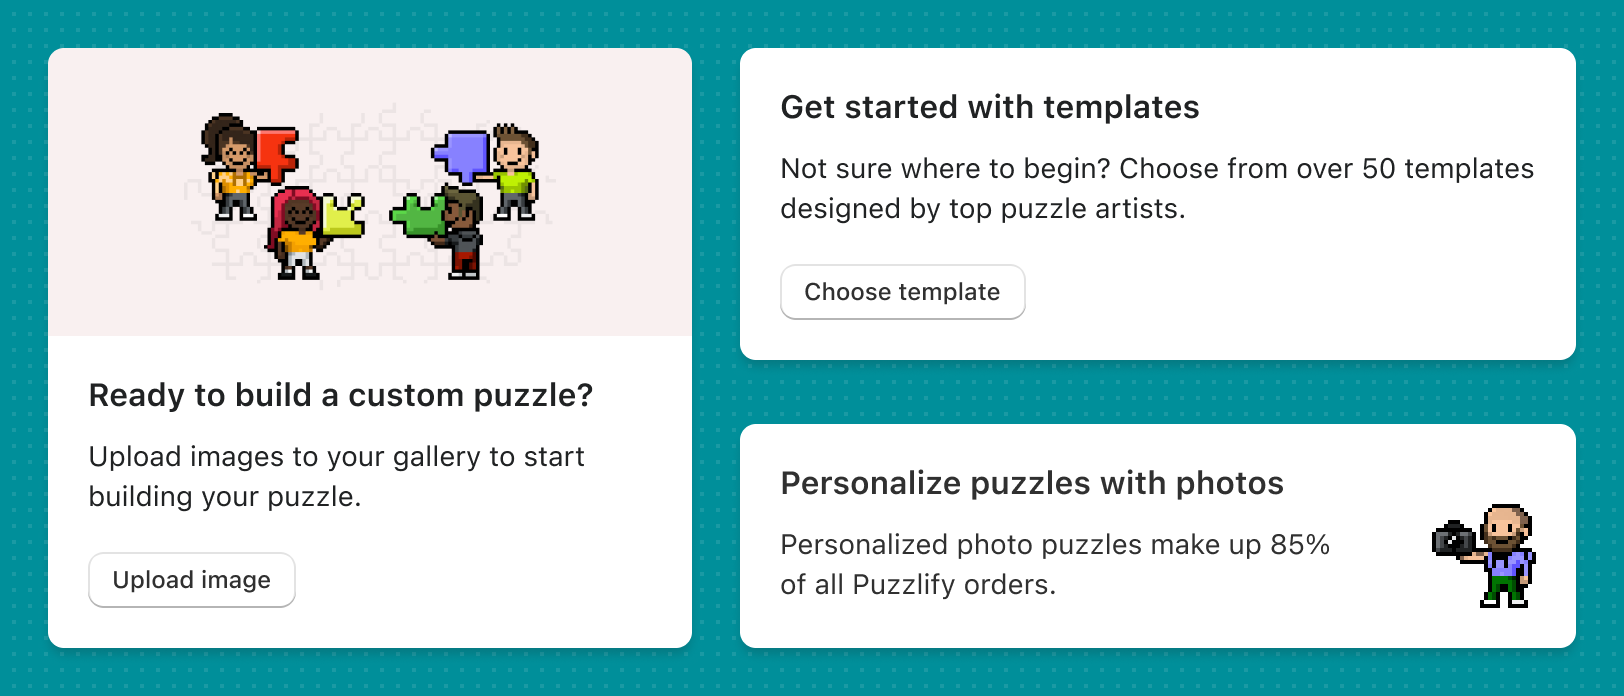 Various cards of the Puzzlify app showing different types of content